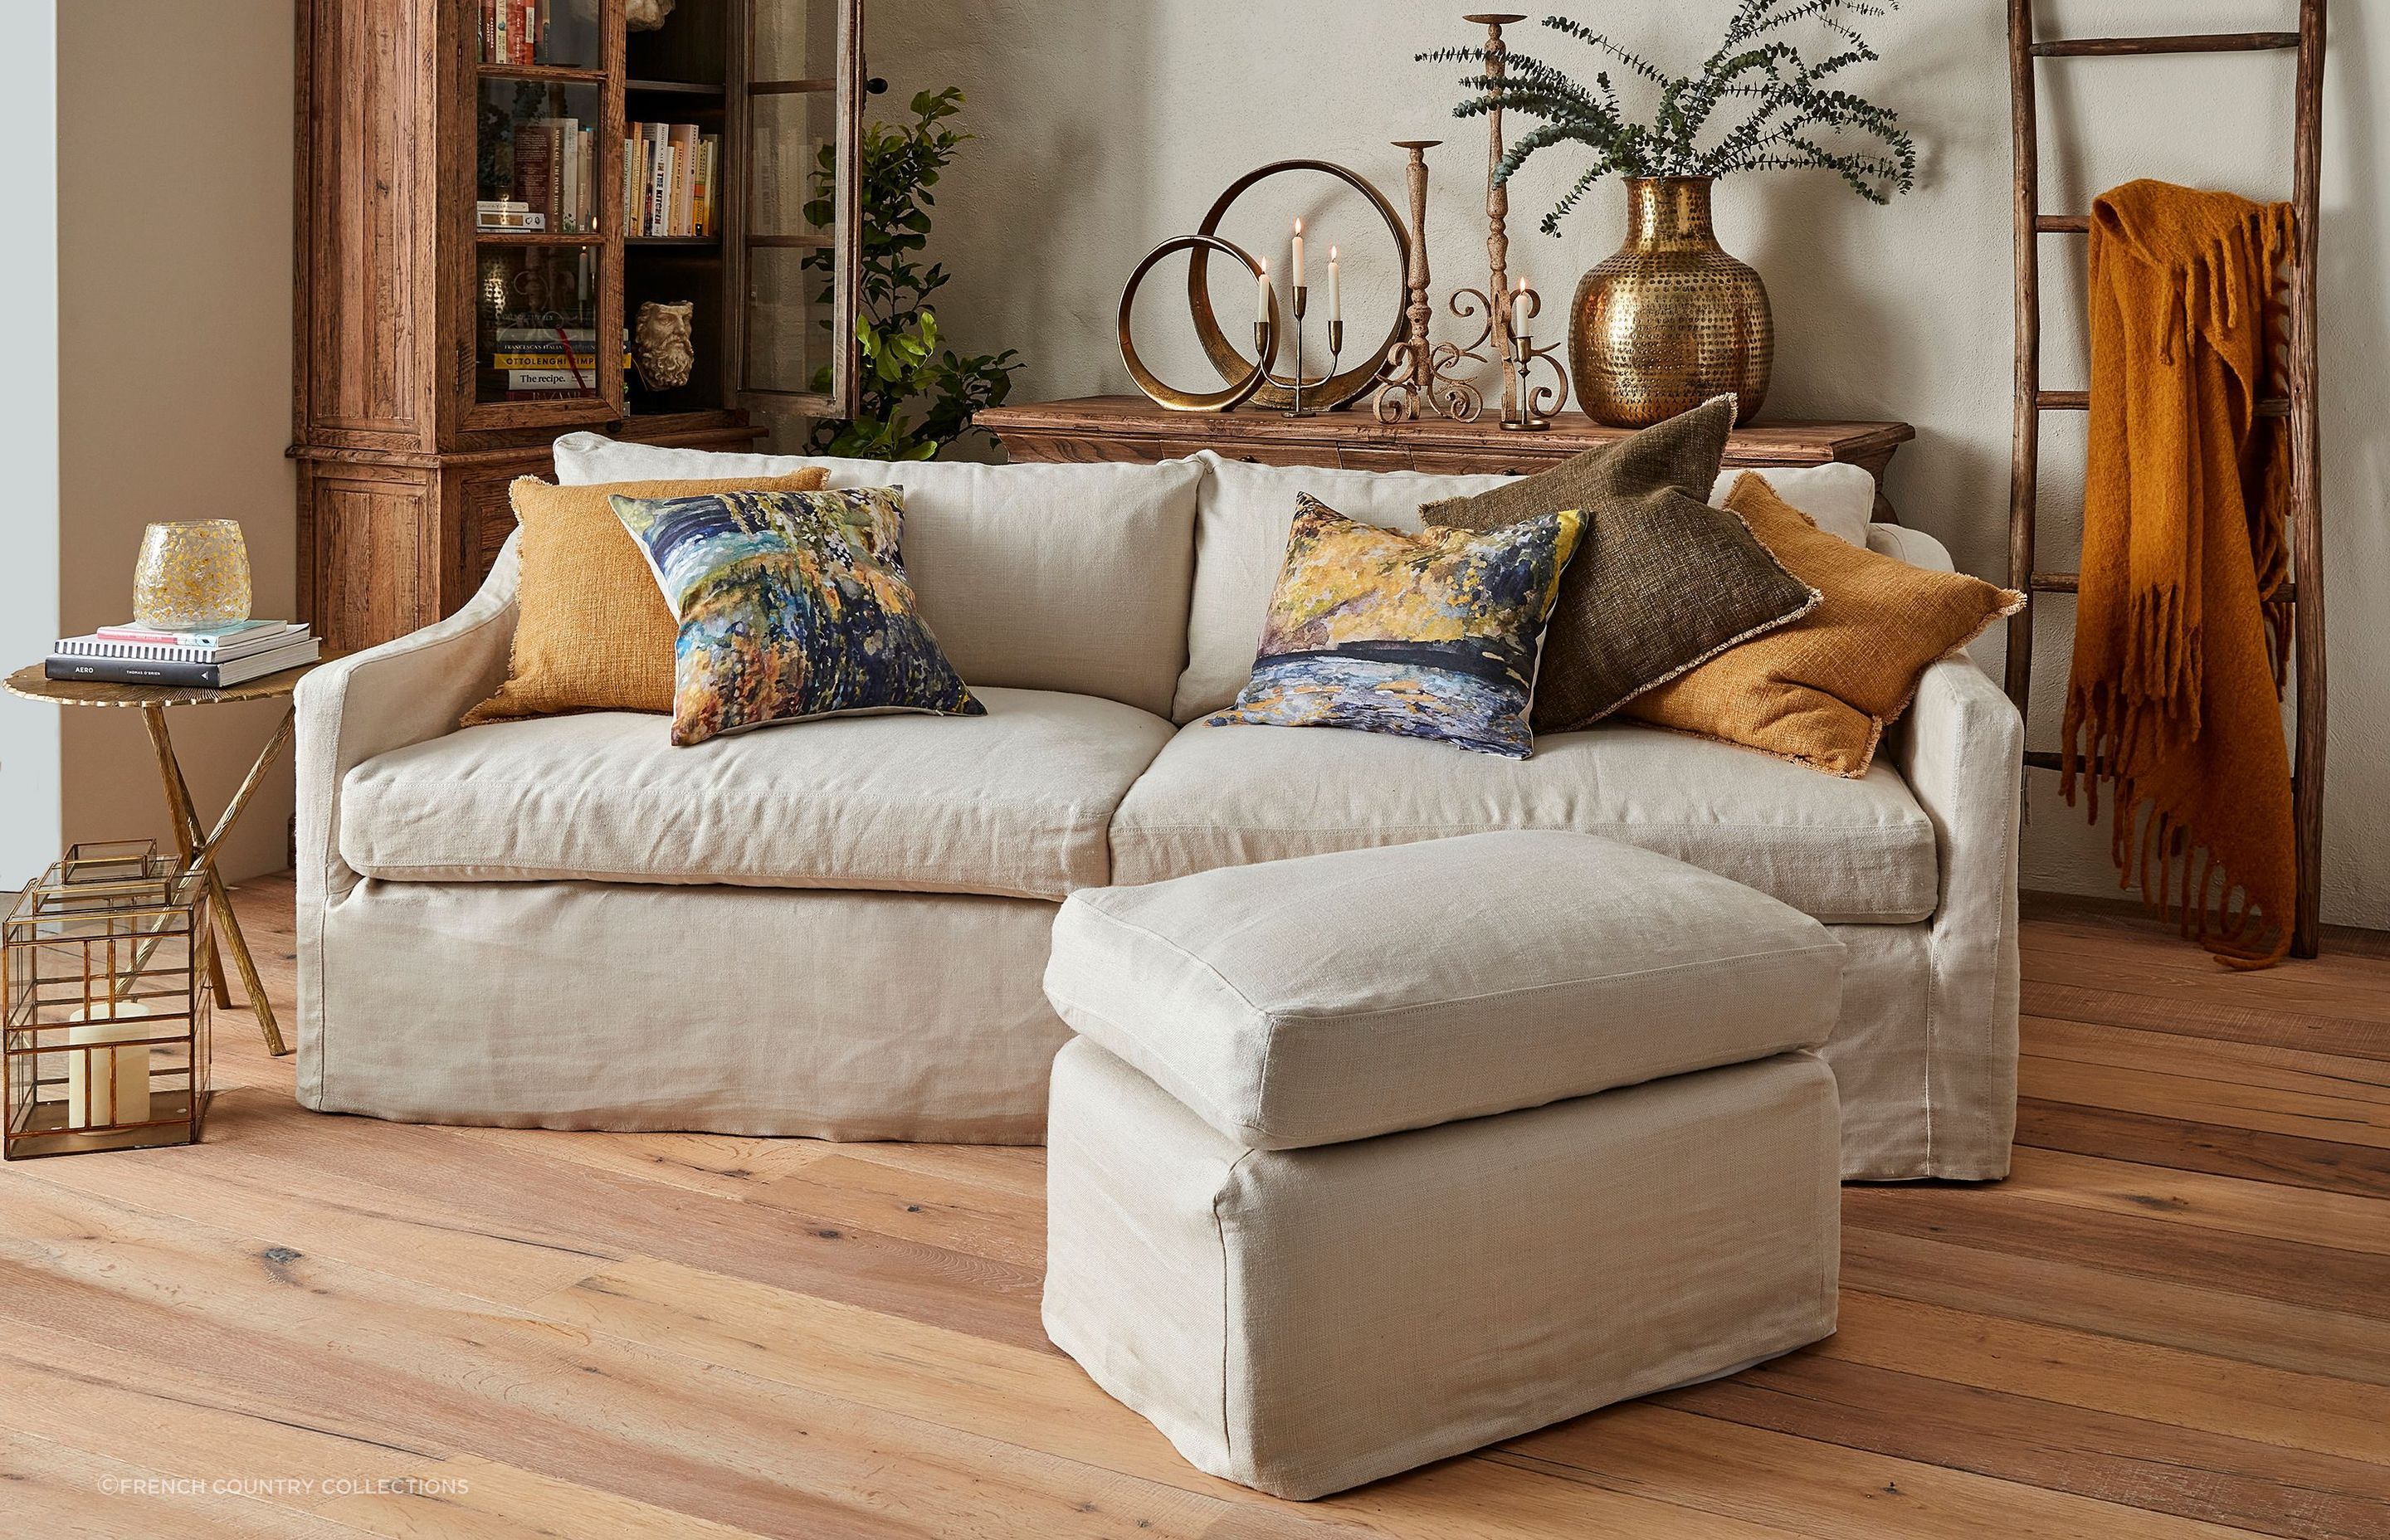 How To Use An Ottoman 10 Clever Ways